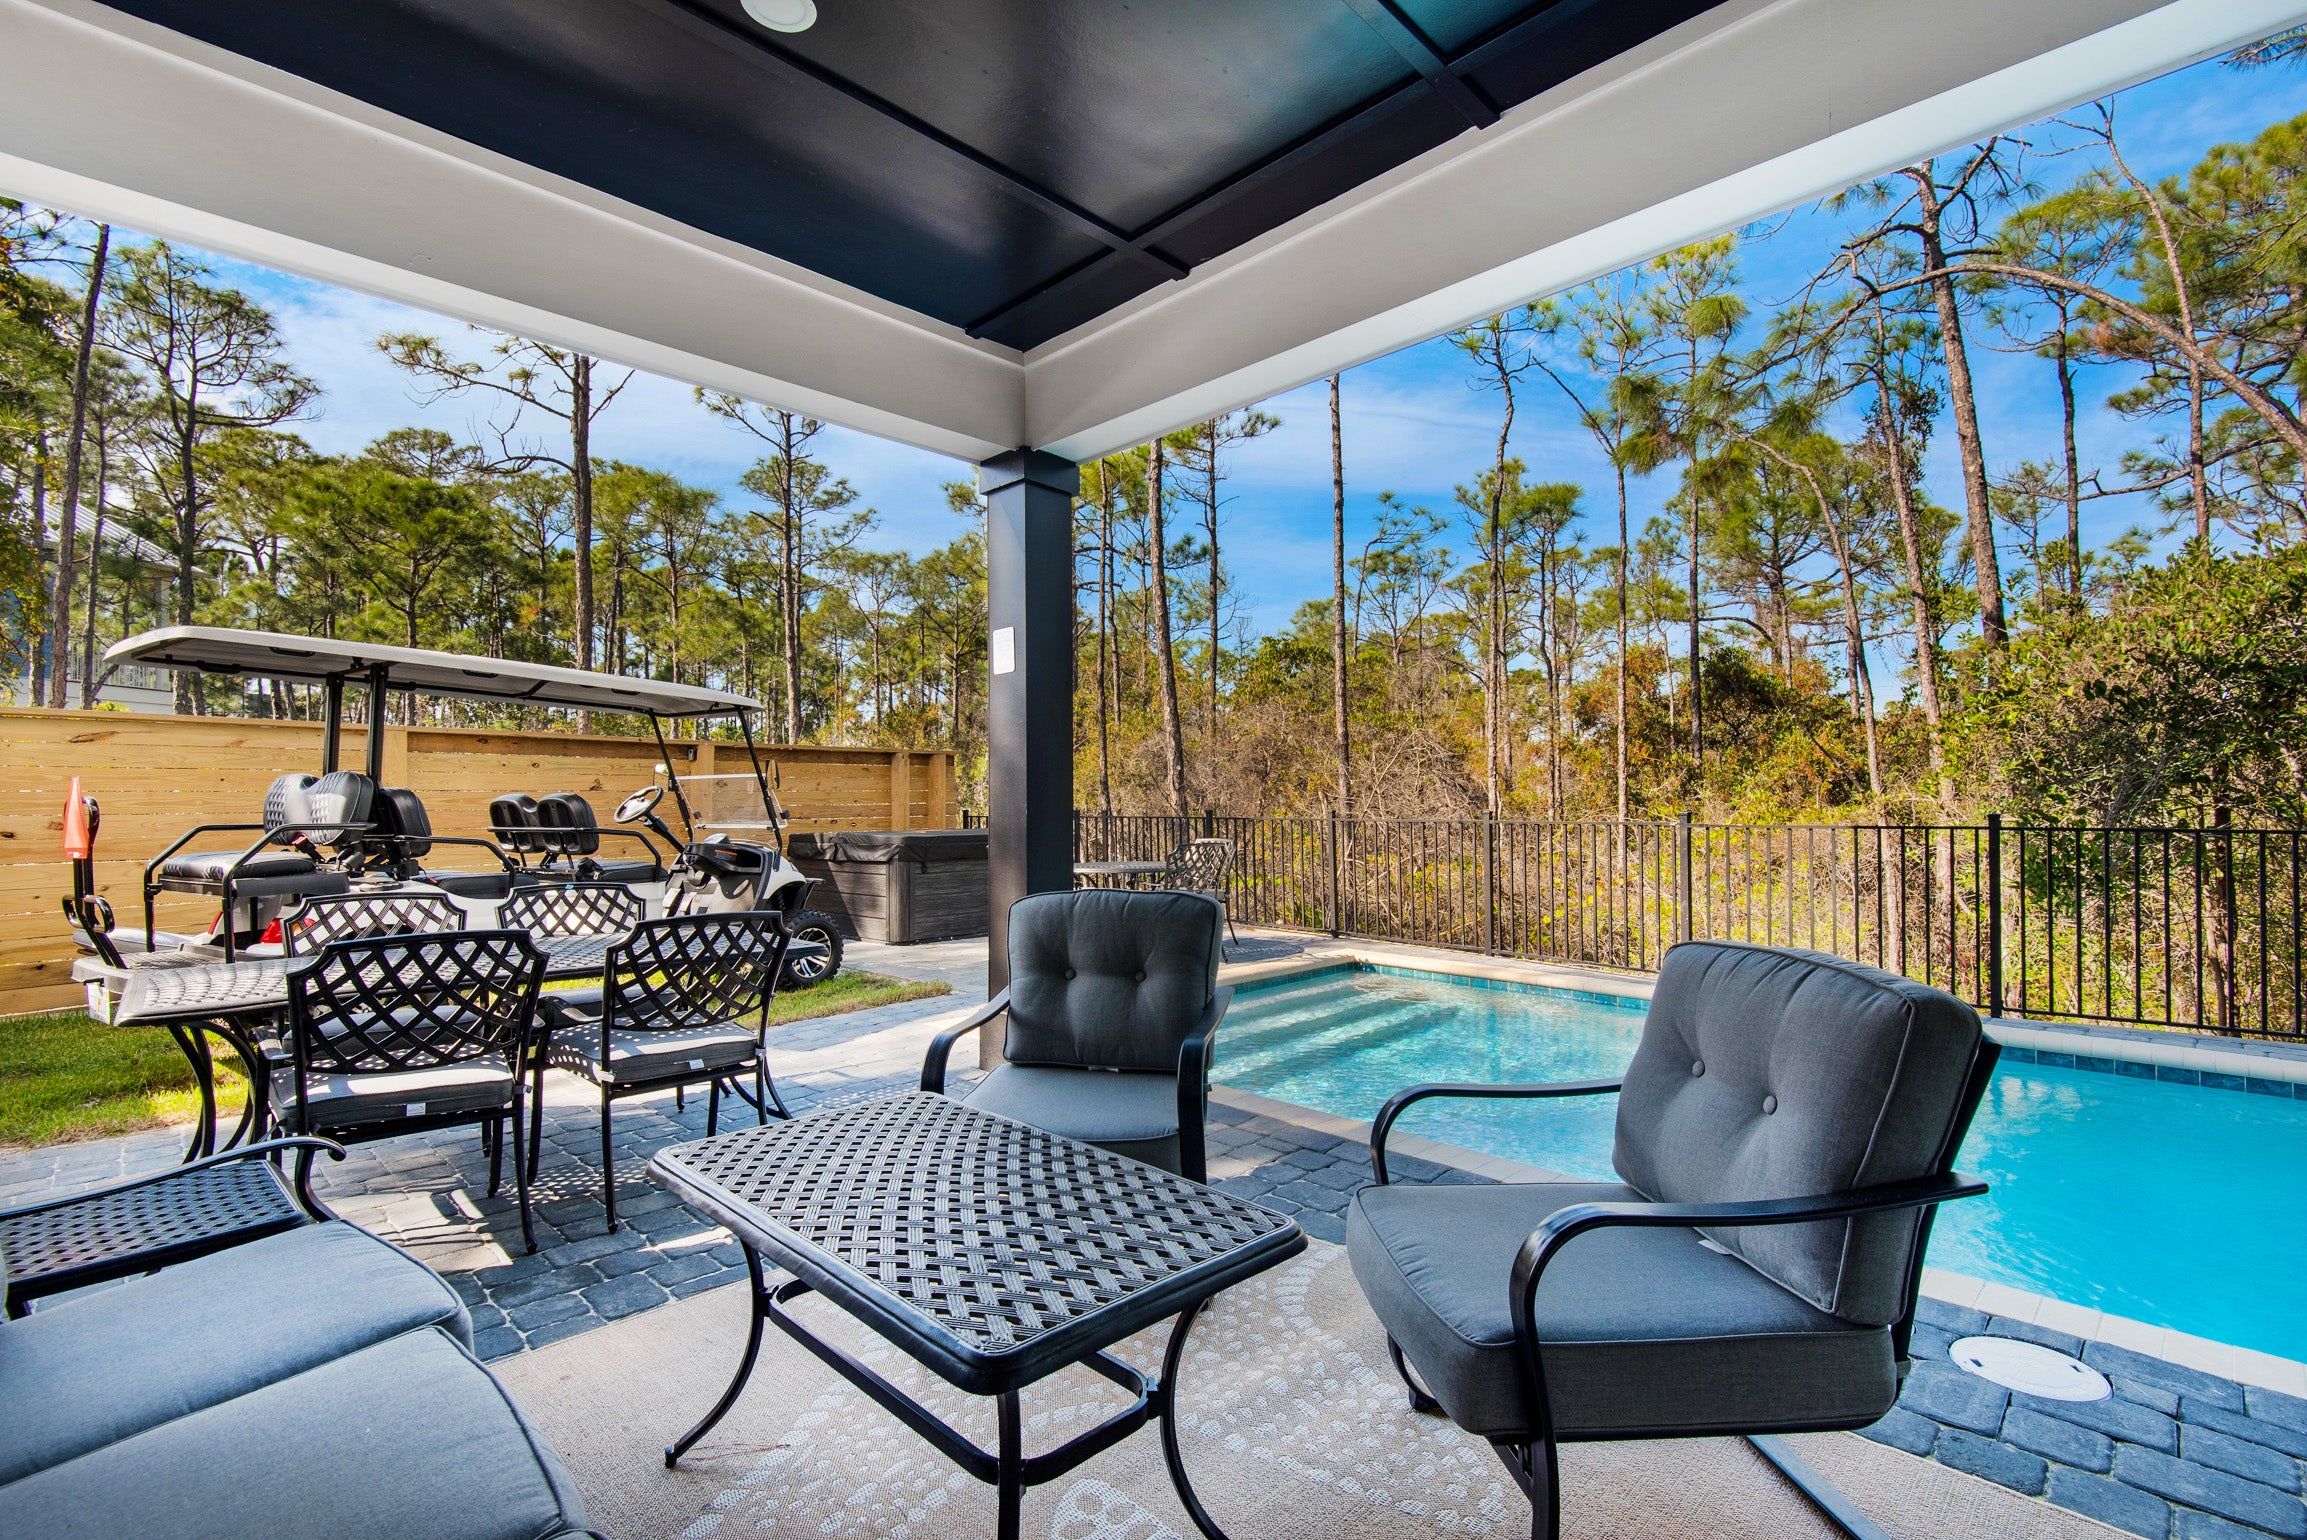 Relax on the back patio by the pool and hot tub